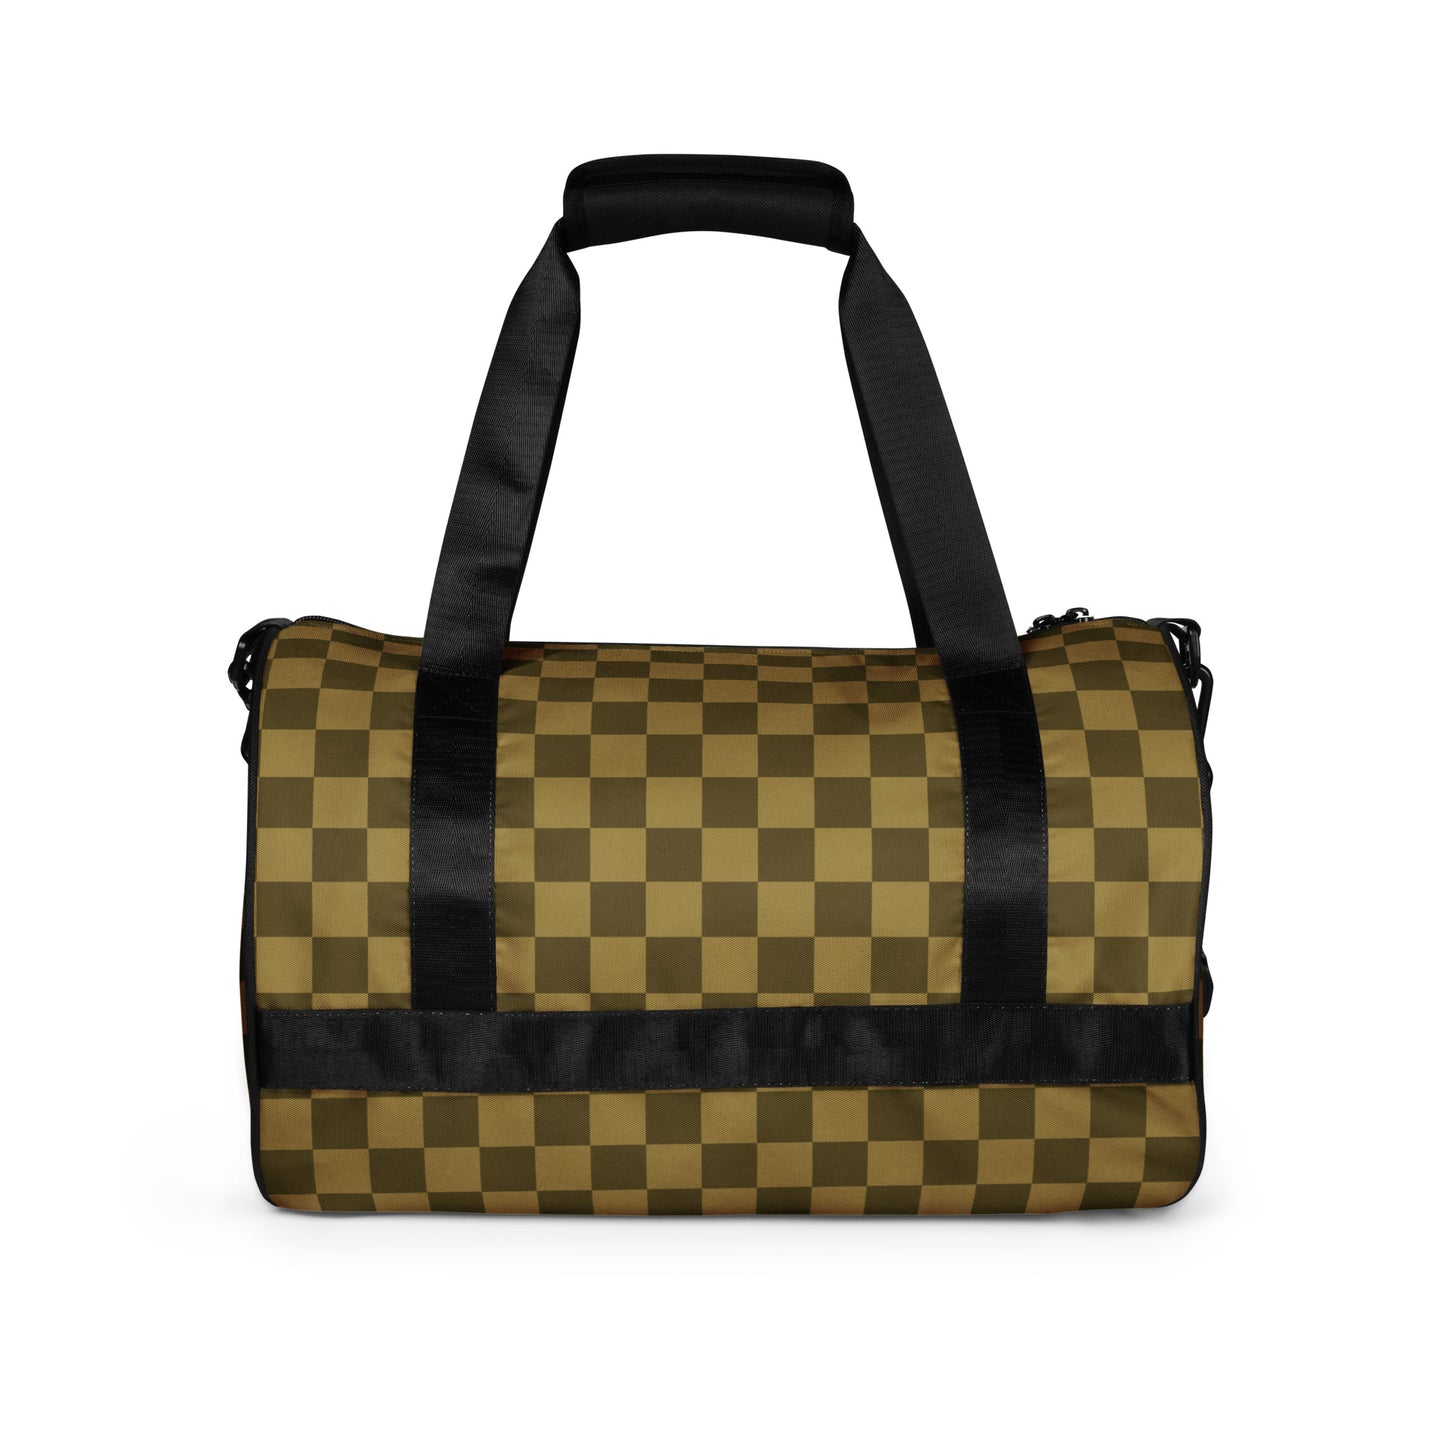 Wempy Dyocta Koto Signature Casual - Sustainably Made gym bag